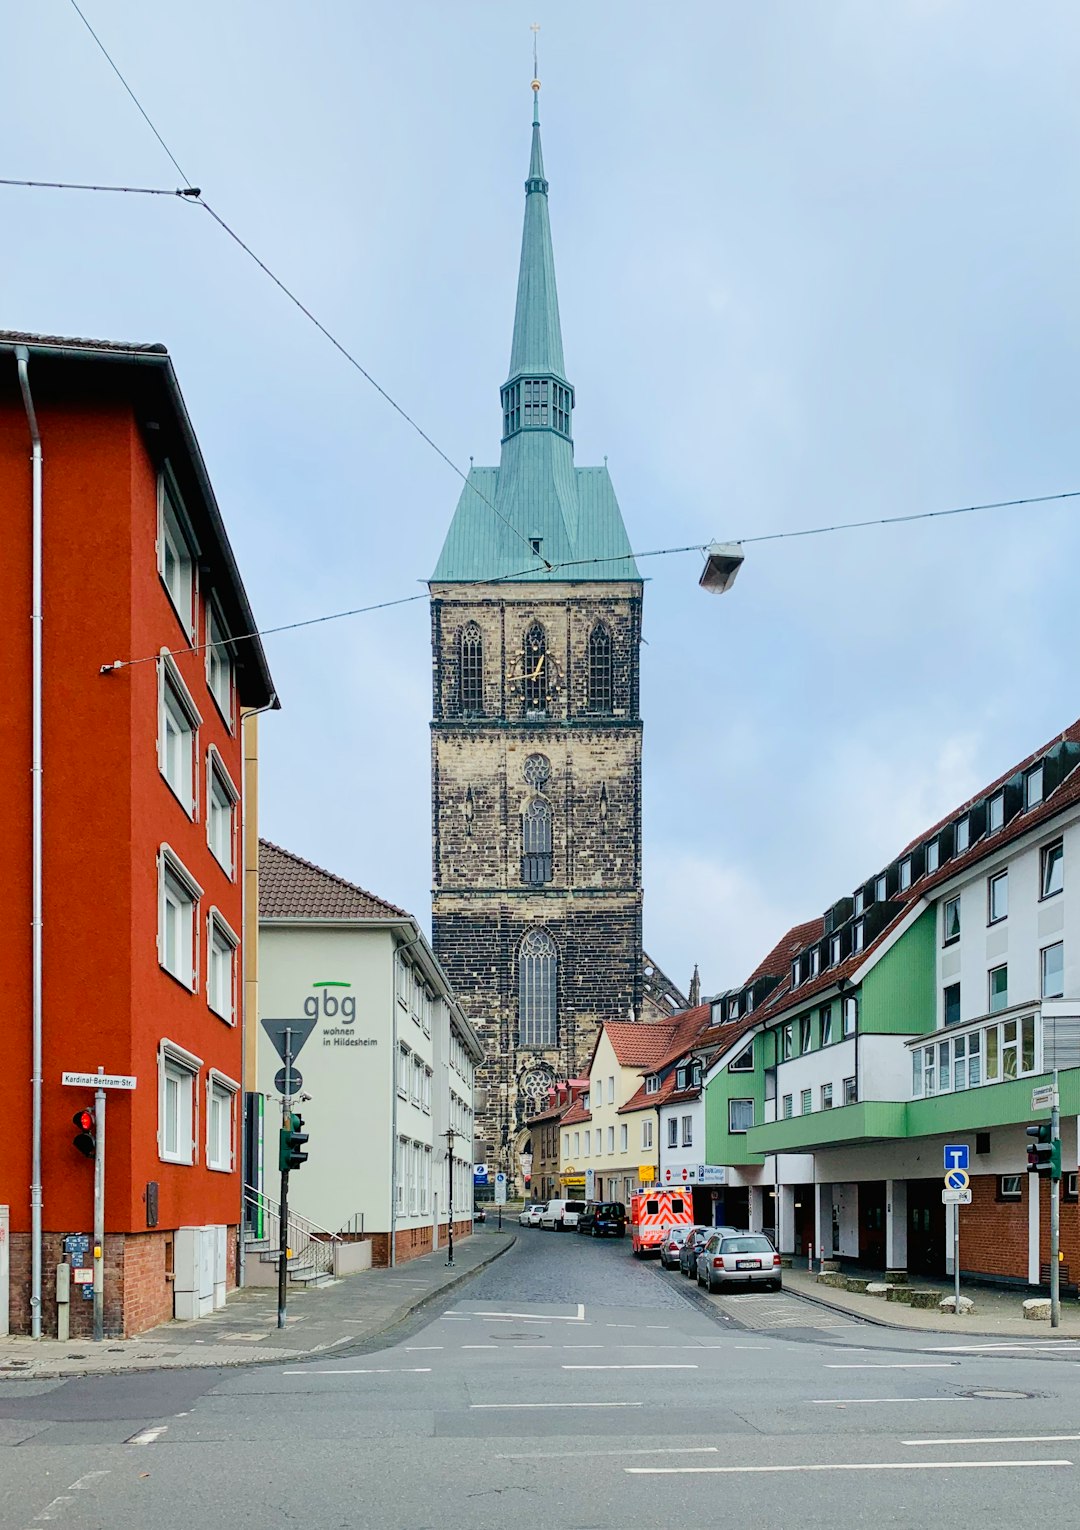 Travel Tips and Stories of Hildesheim in Germany